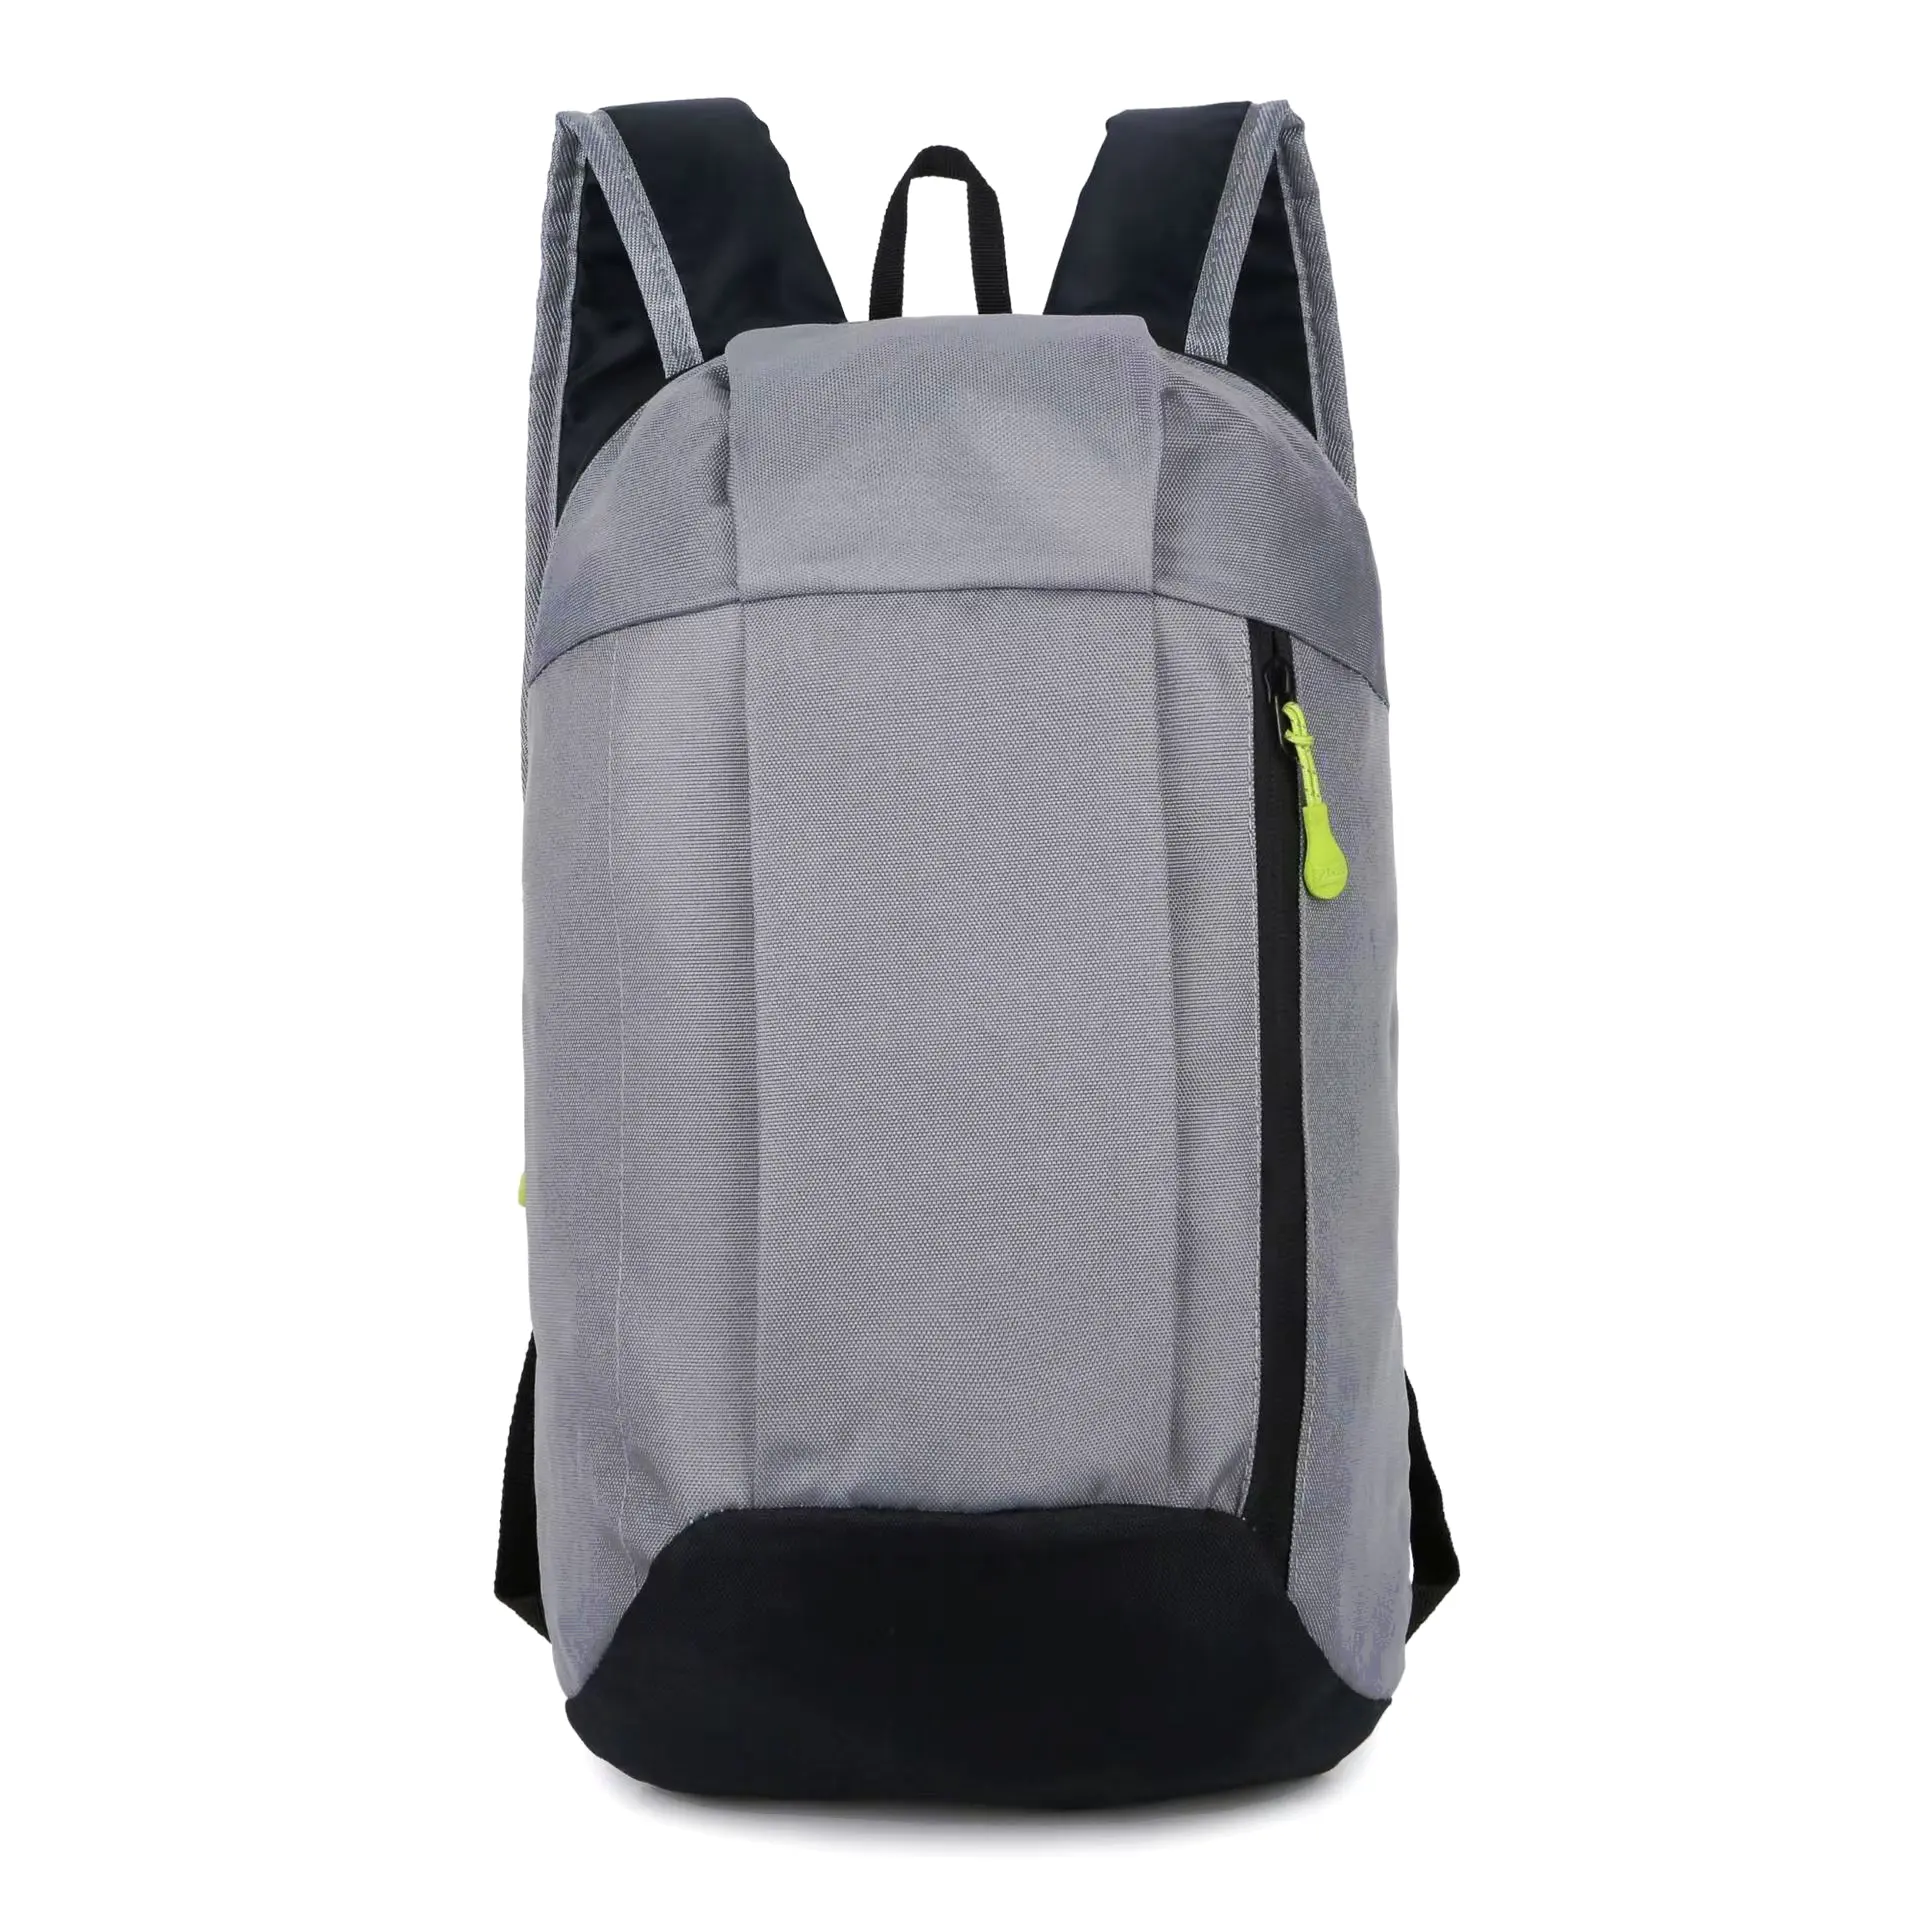 2023 New French Design Men's And Women's Outdoor Leisure Travel Backpack / Kindly 10L school bags / book bag